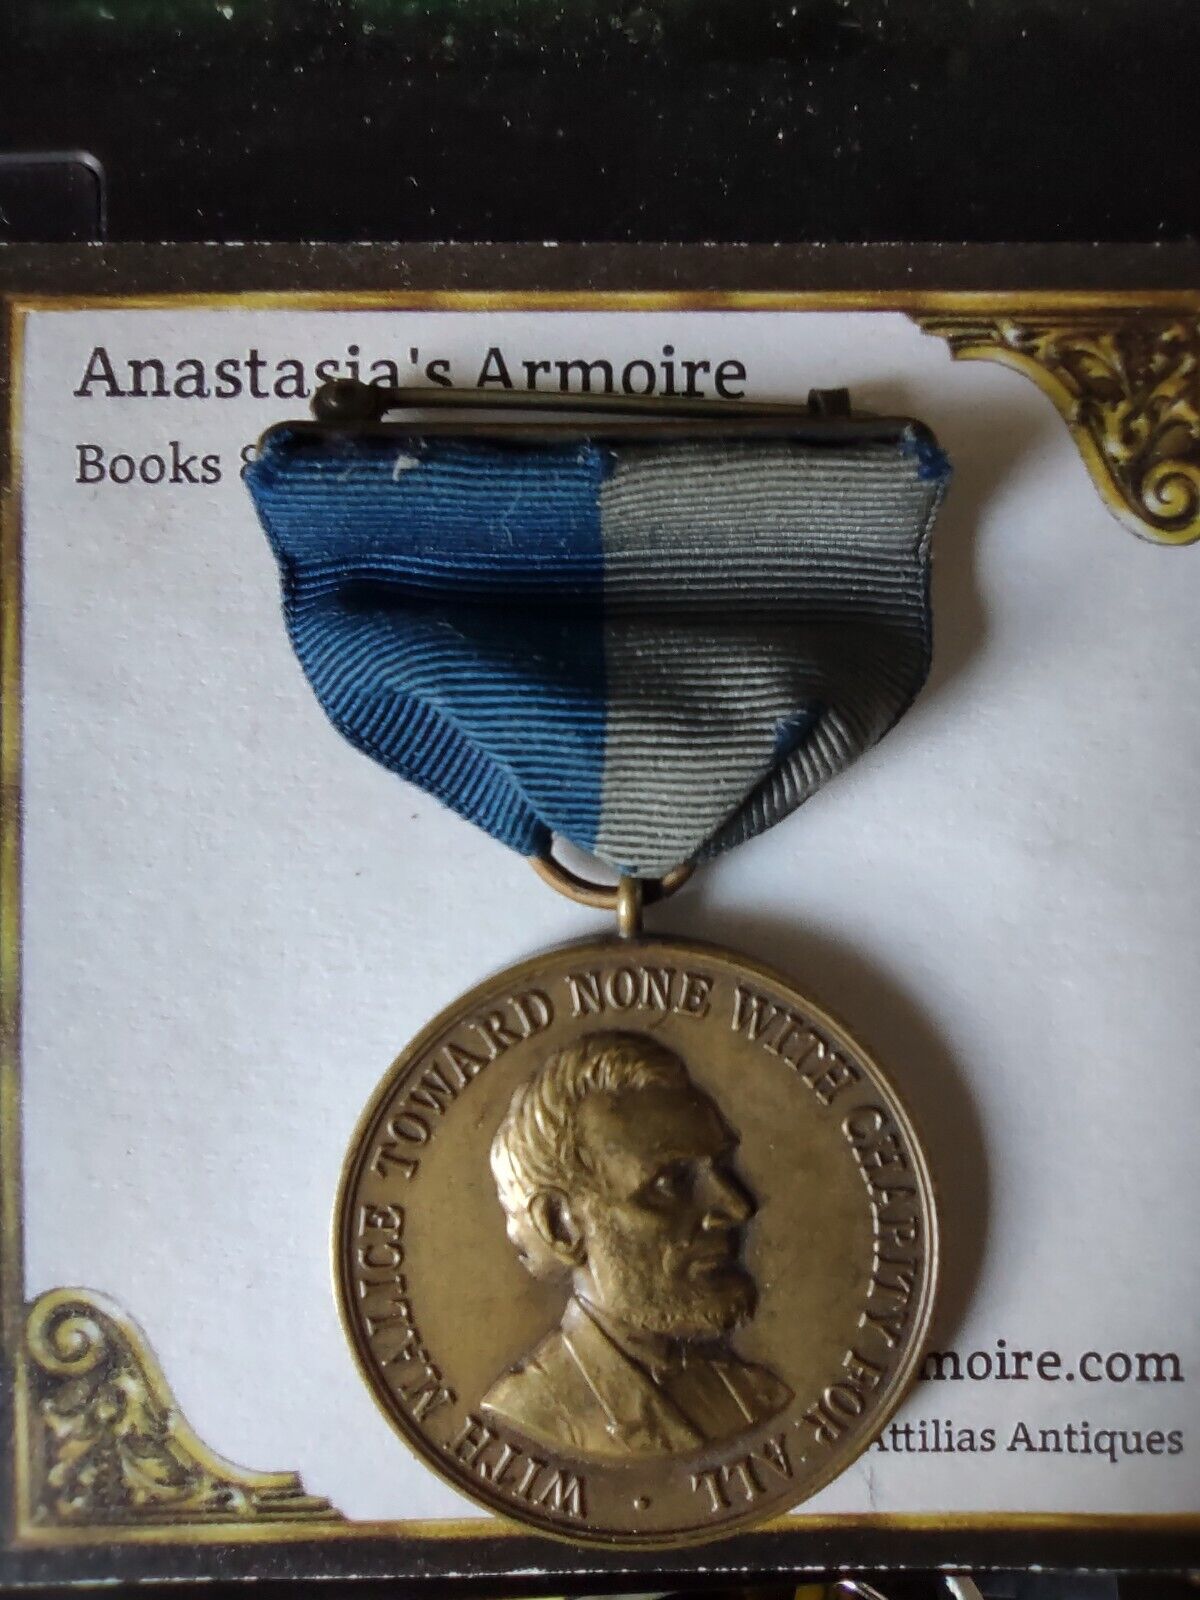 Civil war medal Lincoln brass With Malice Toward None blue gray M no.4538 on rim